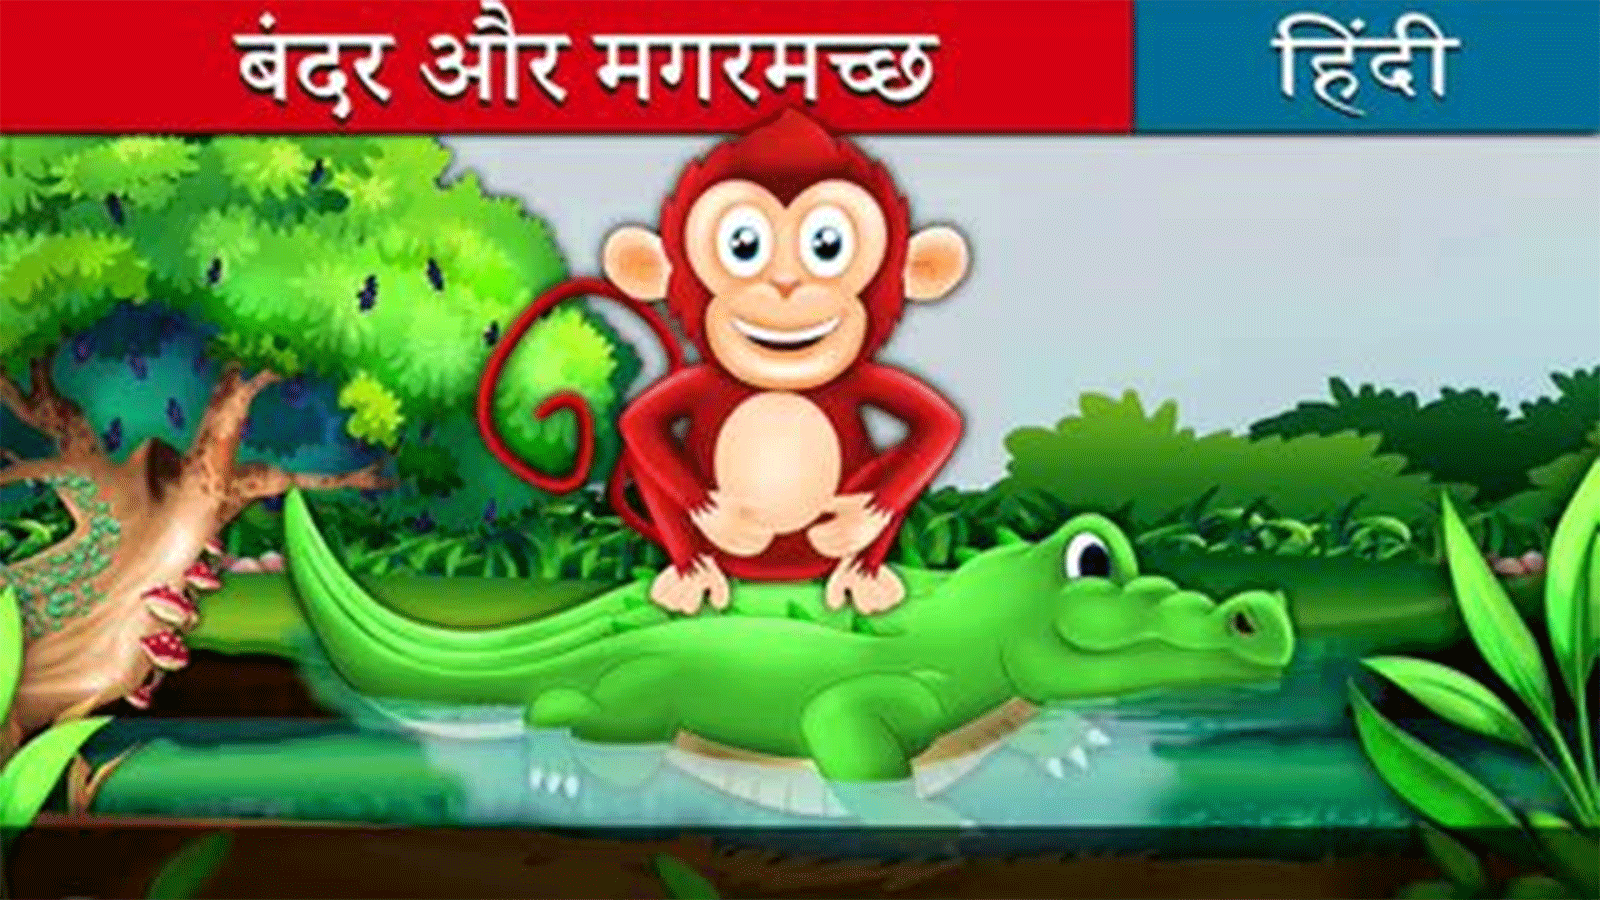 Watch Popular Children Hindi Nursery Story 'Monkey and Crocodile' for Kids  - Check out Fun Kids Nursery Rhymes And Baby Songs In Hindi | Entertainment  - Times of India Videos